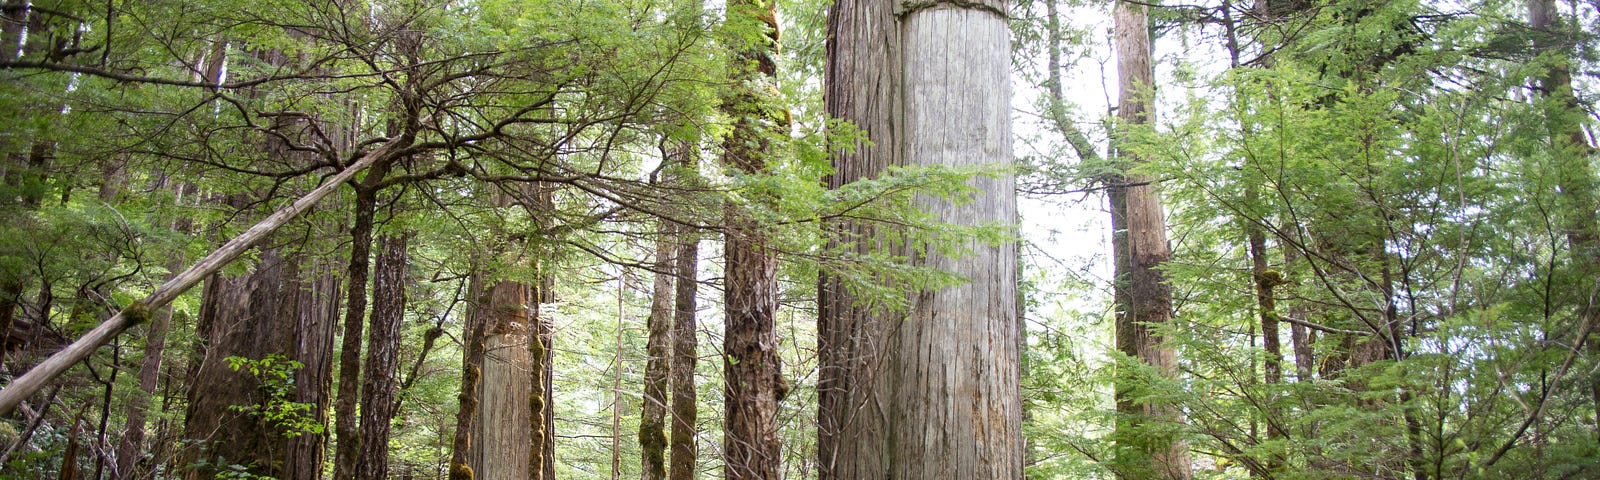 Trees in a forest. Two trees (one in the foreground and one in the background) are missing large rectangular pieces of bark.